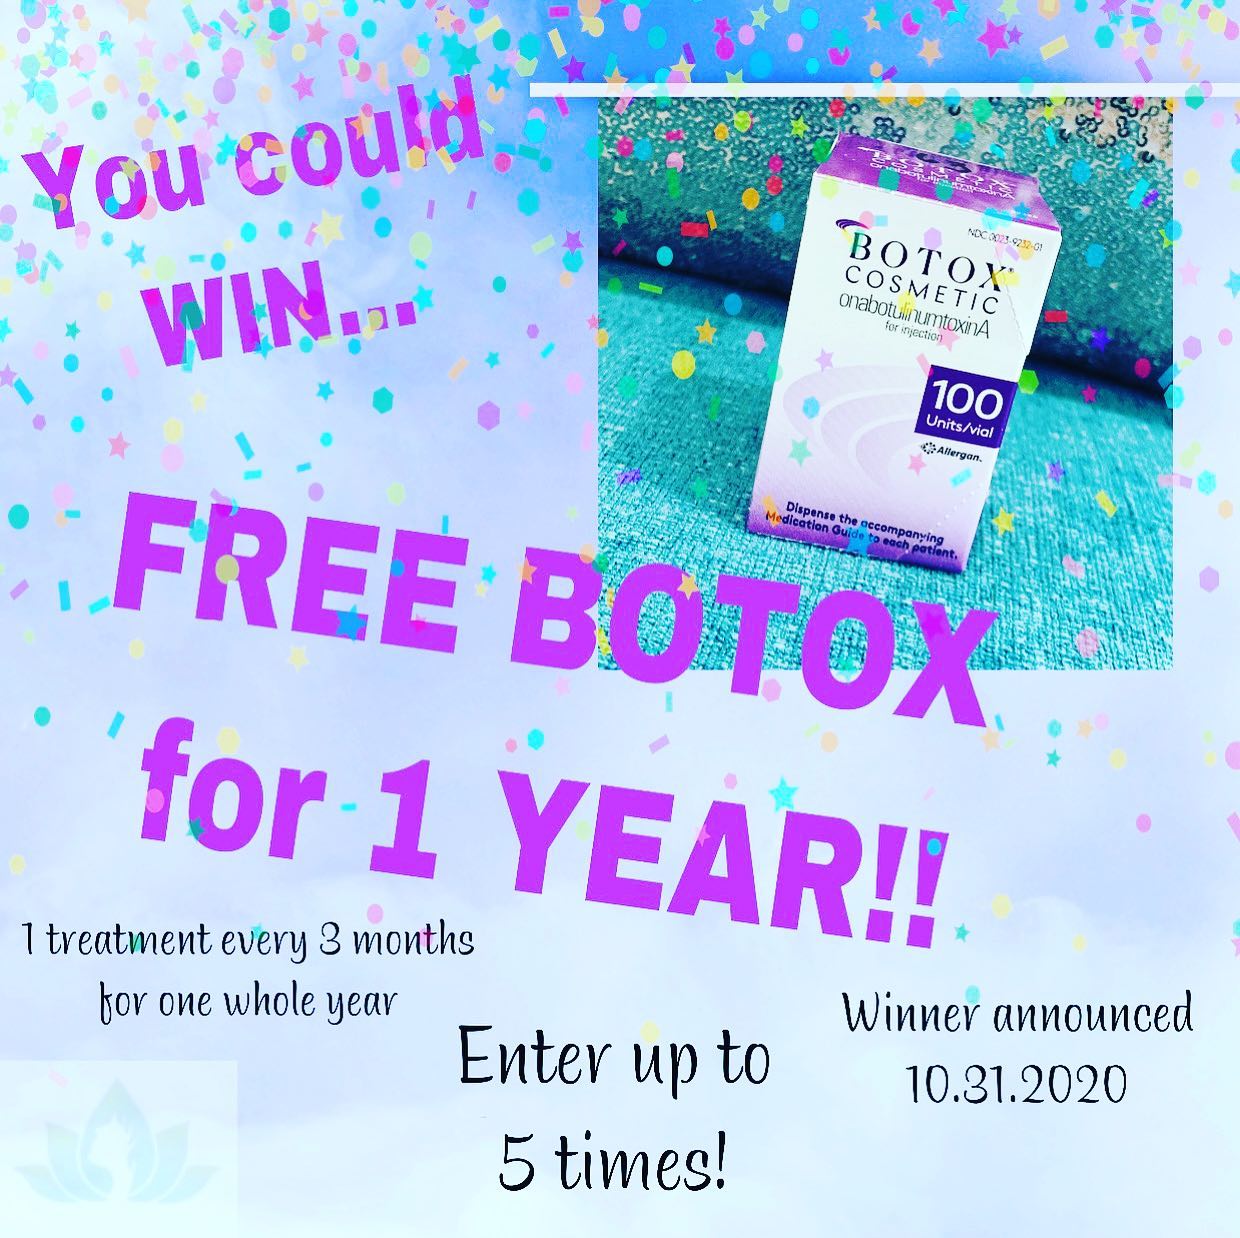 SPECIAL! Win Free Botox For 1 Year Bay Area Aesthetics & Wellness